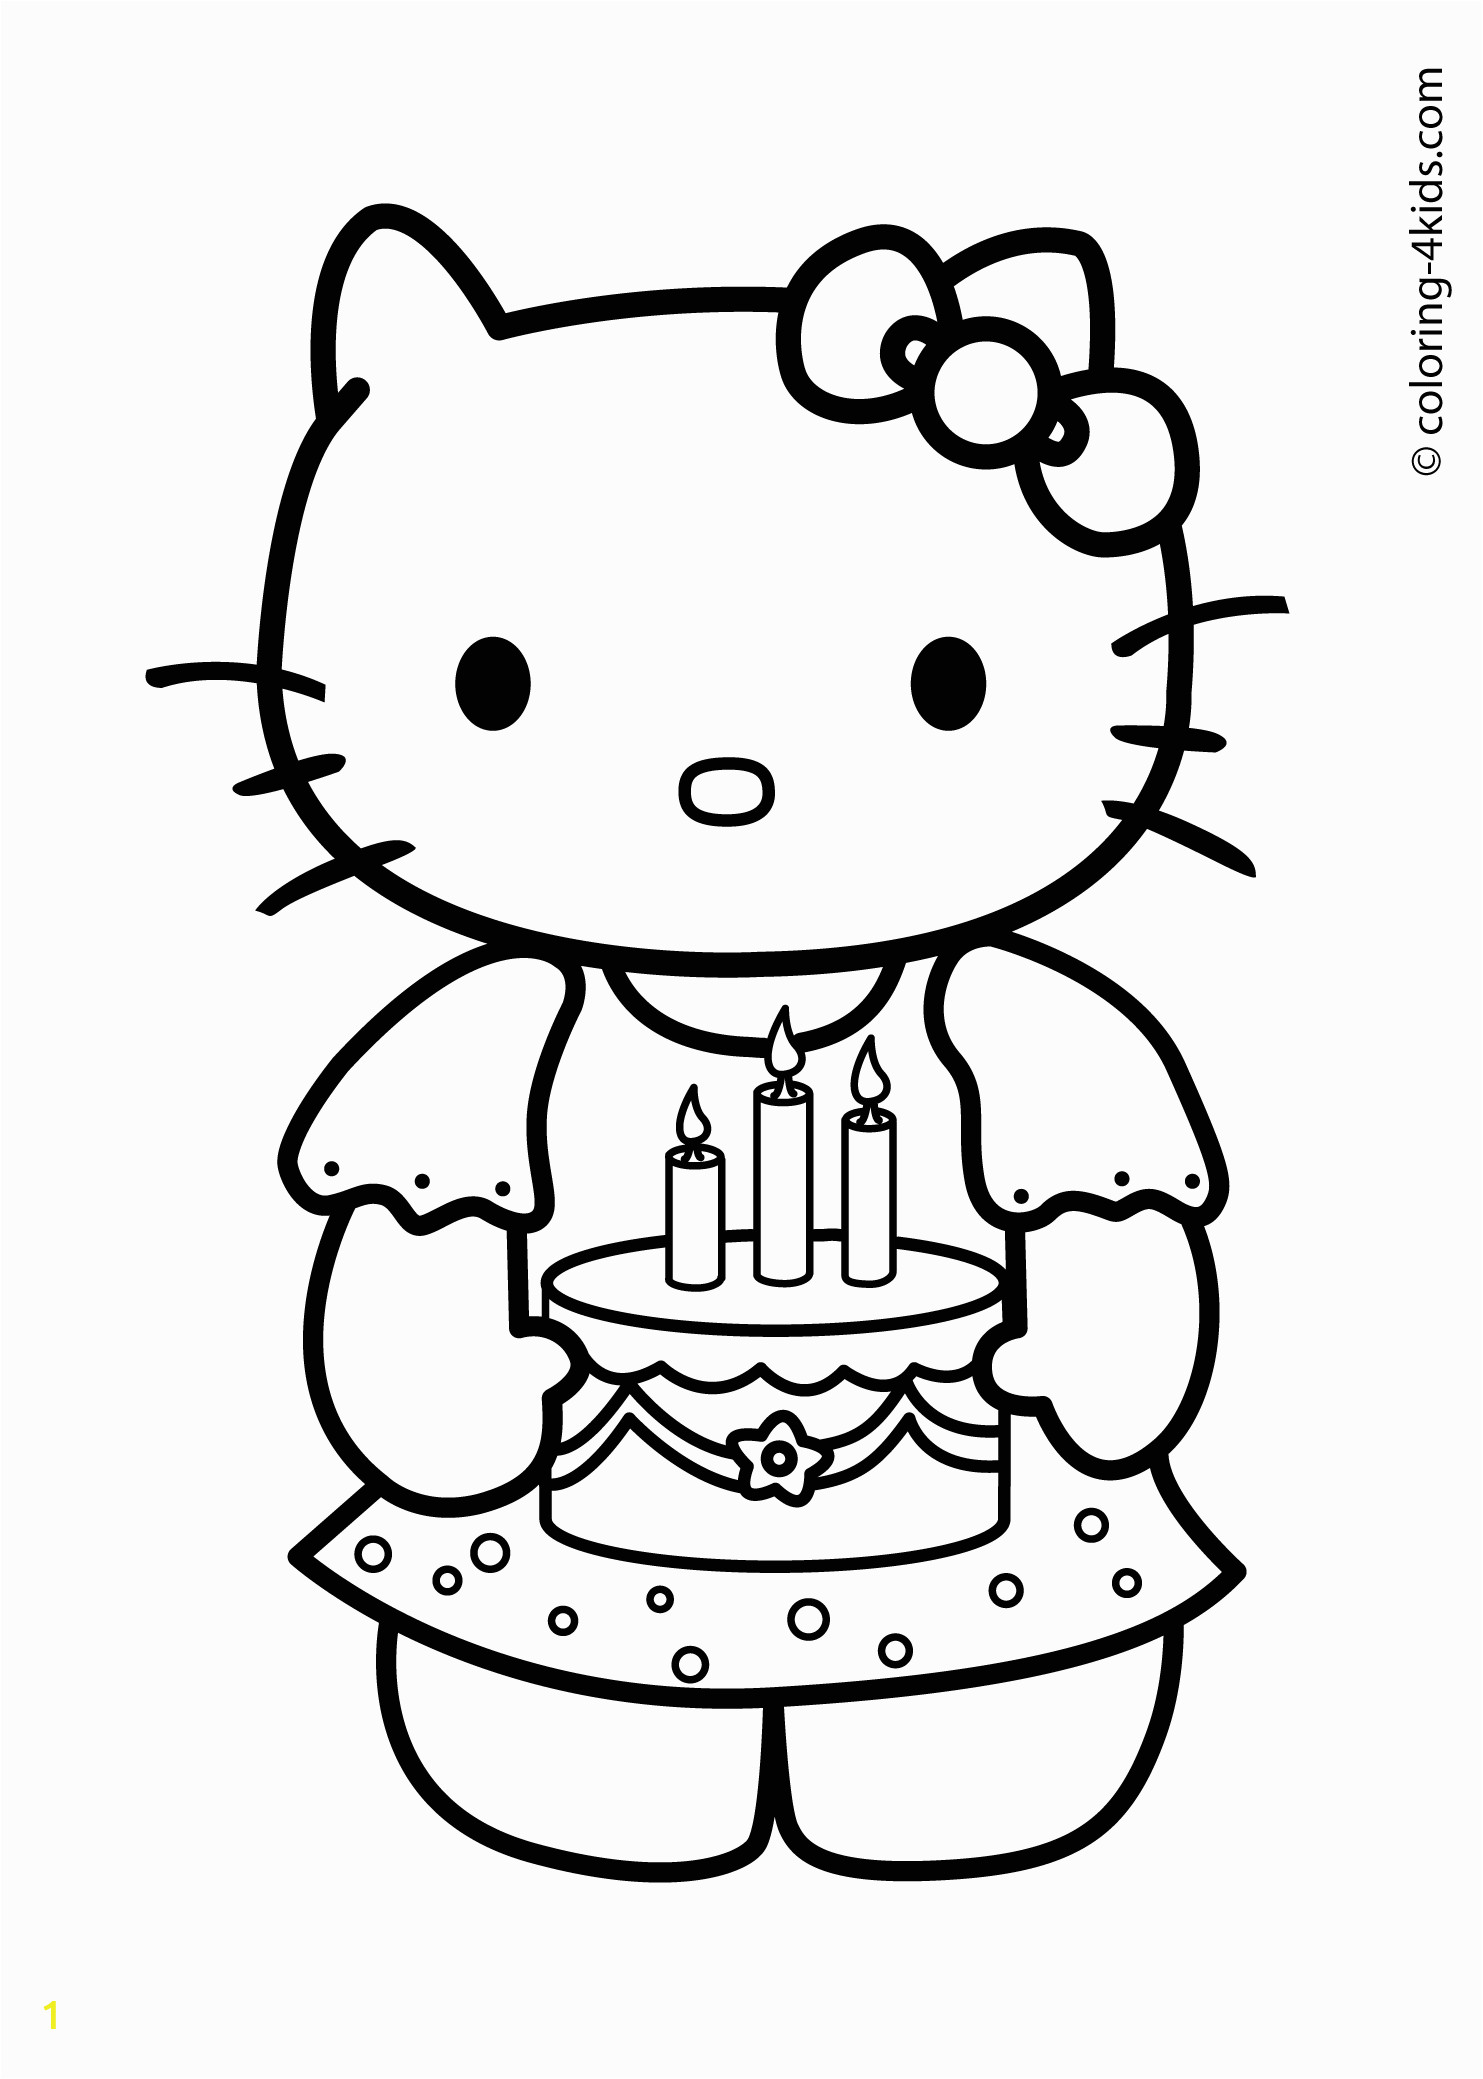 Hello Kitty Get Well soon Coloring Pages Free Hello Kitty Coloring Pages Happy Birthday Download